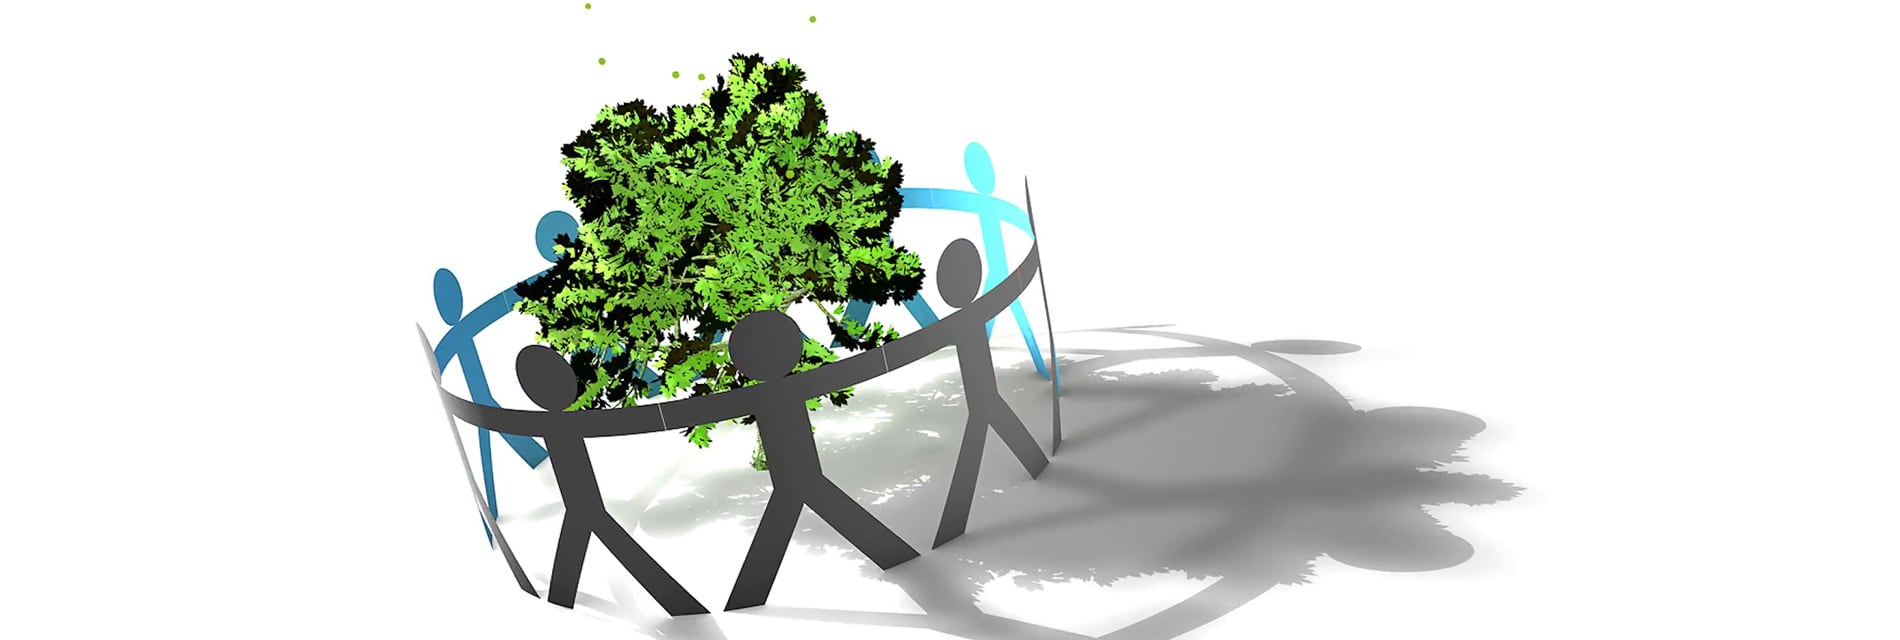 people scircling a tree graphic